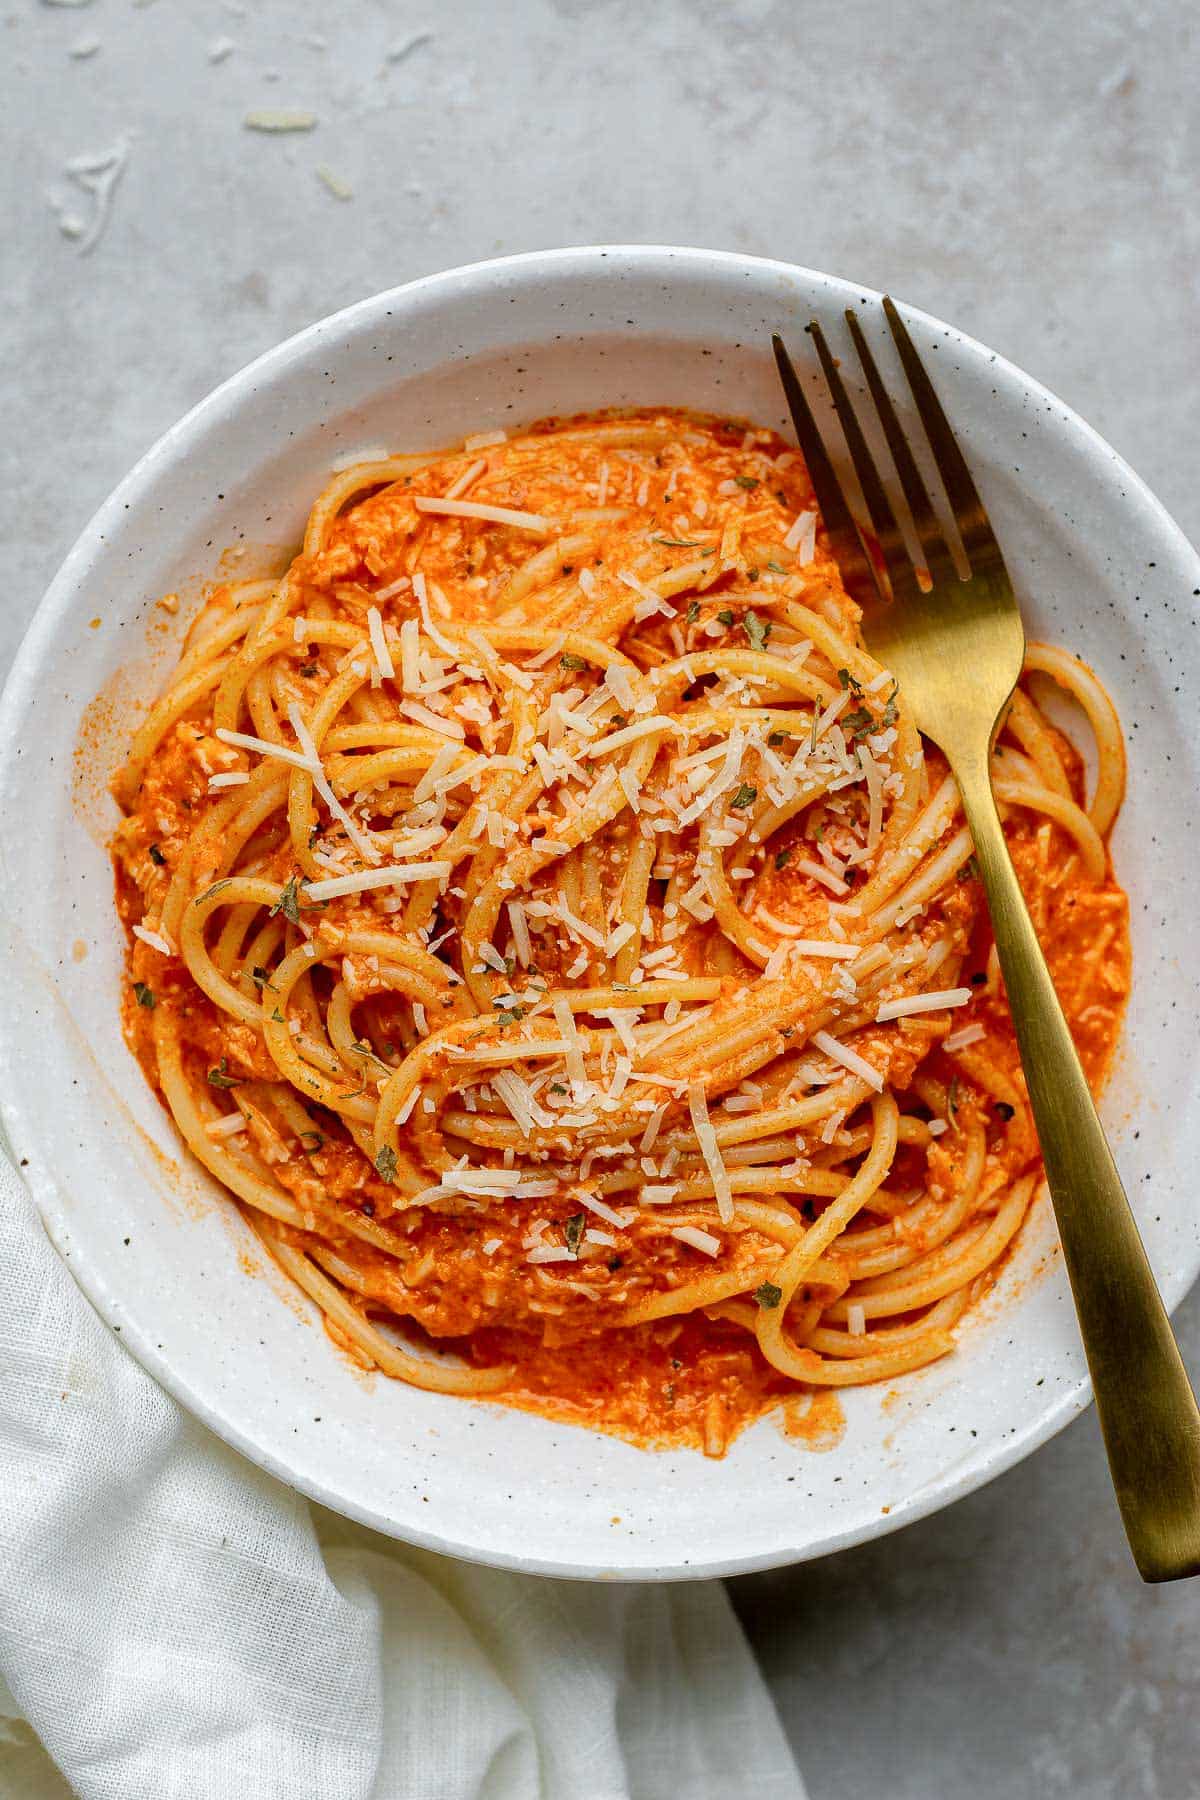 Spaghetti served with roasted red pepper sauce in a white bowl with a fork.